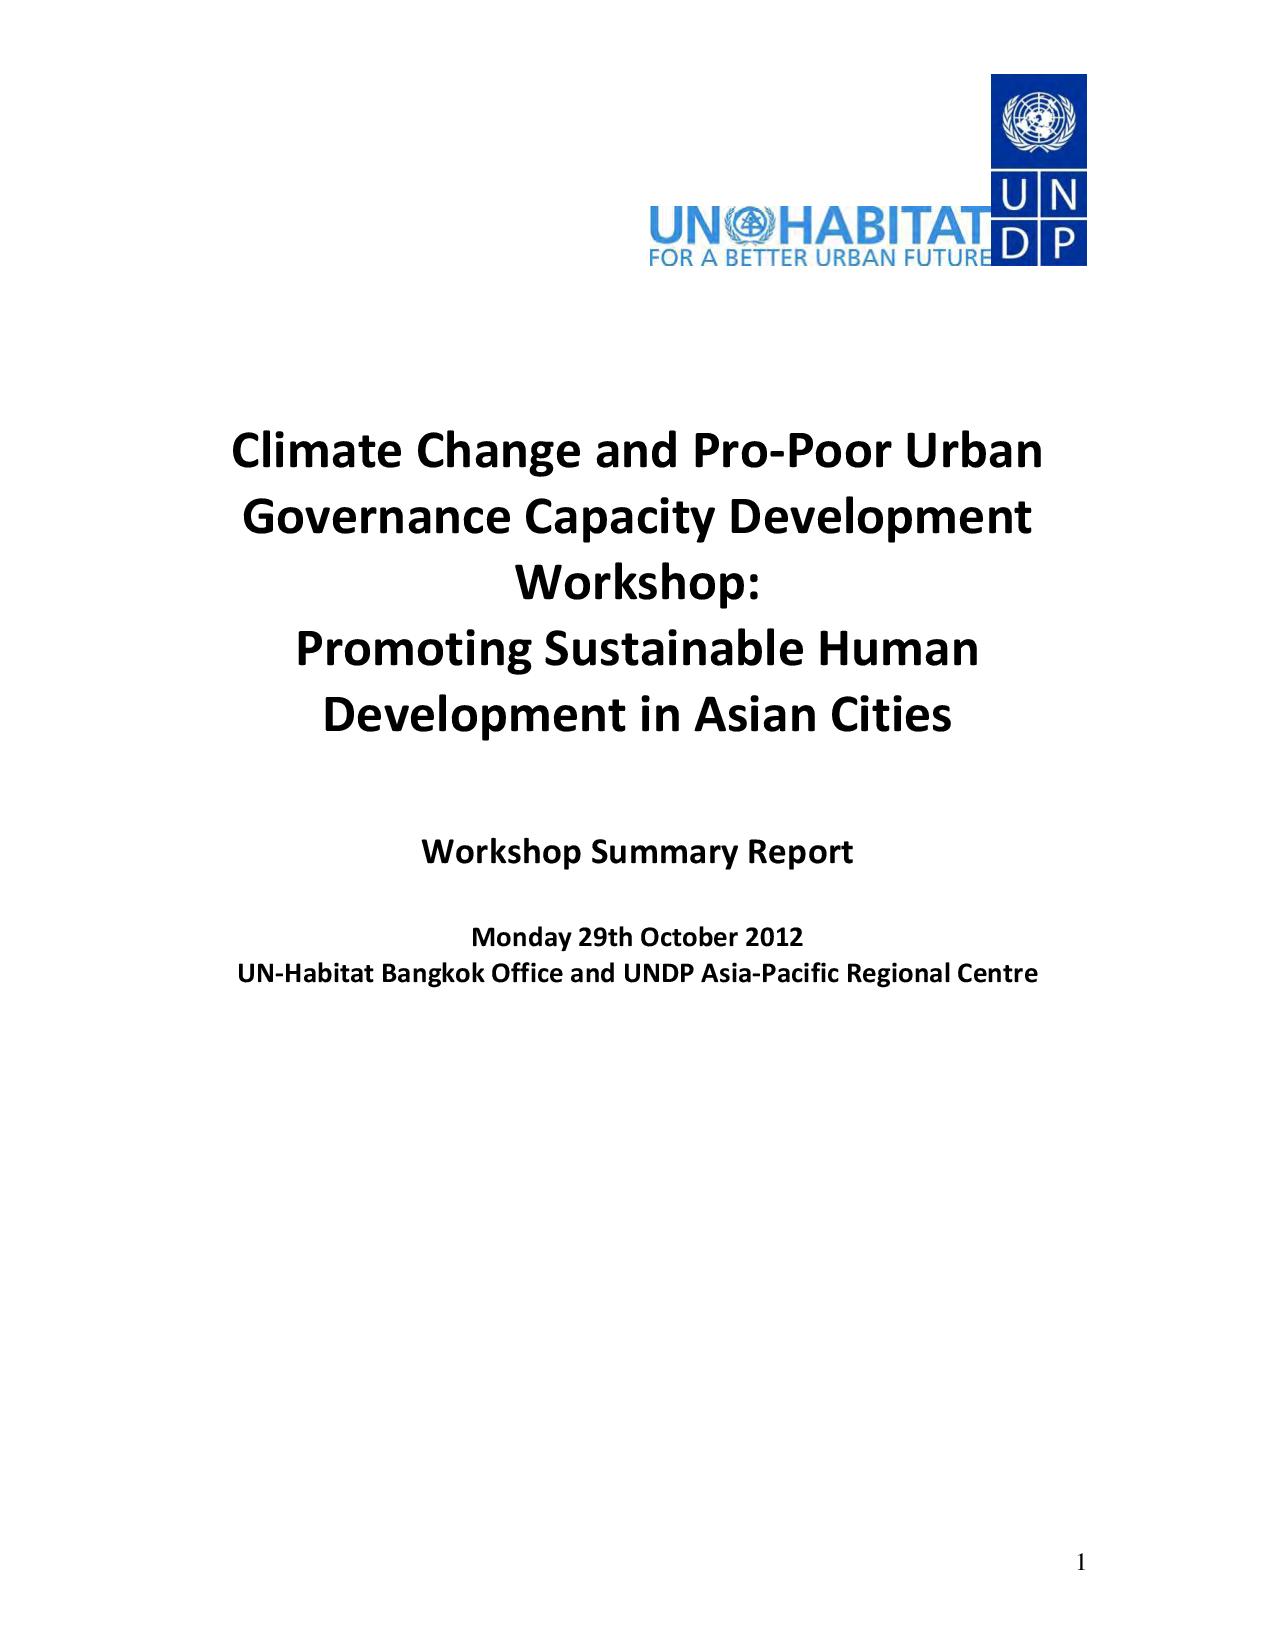 Climate Change and Pro-Poor Urban Governance Capacity Development Workshop: Promoting Sustainable Human Development in Asian Cities (Bangkok, Thailand, November 2012)